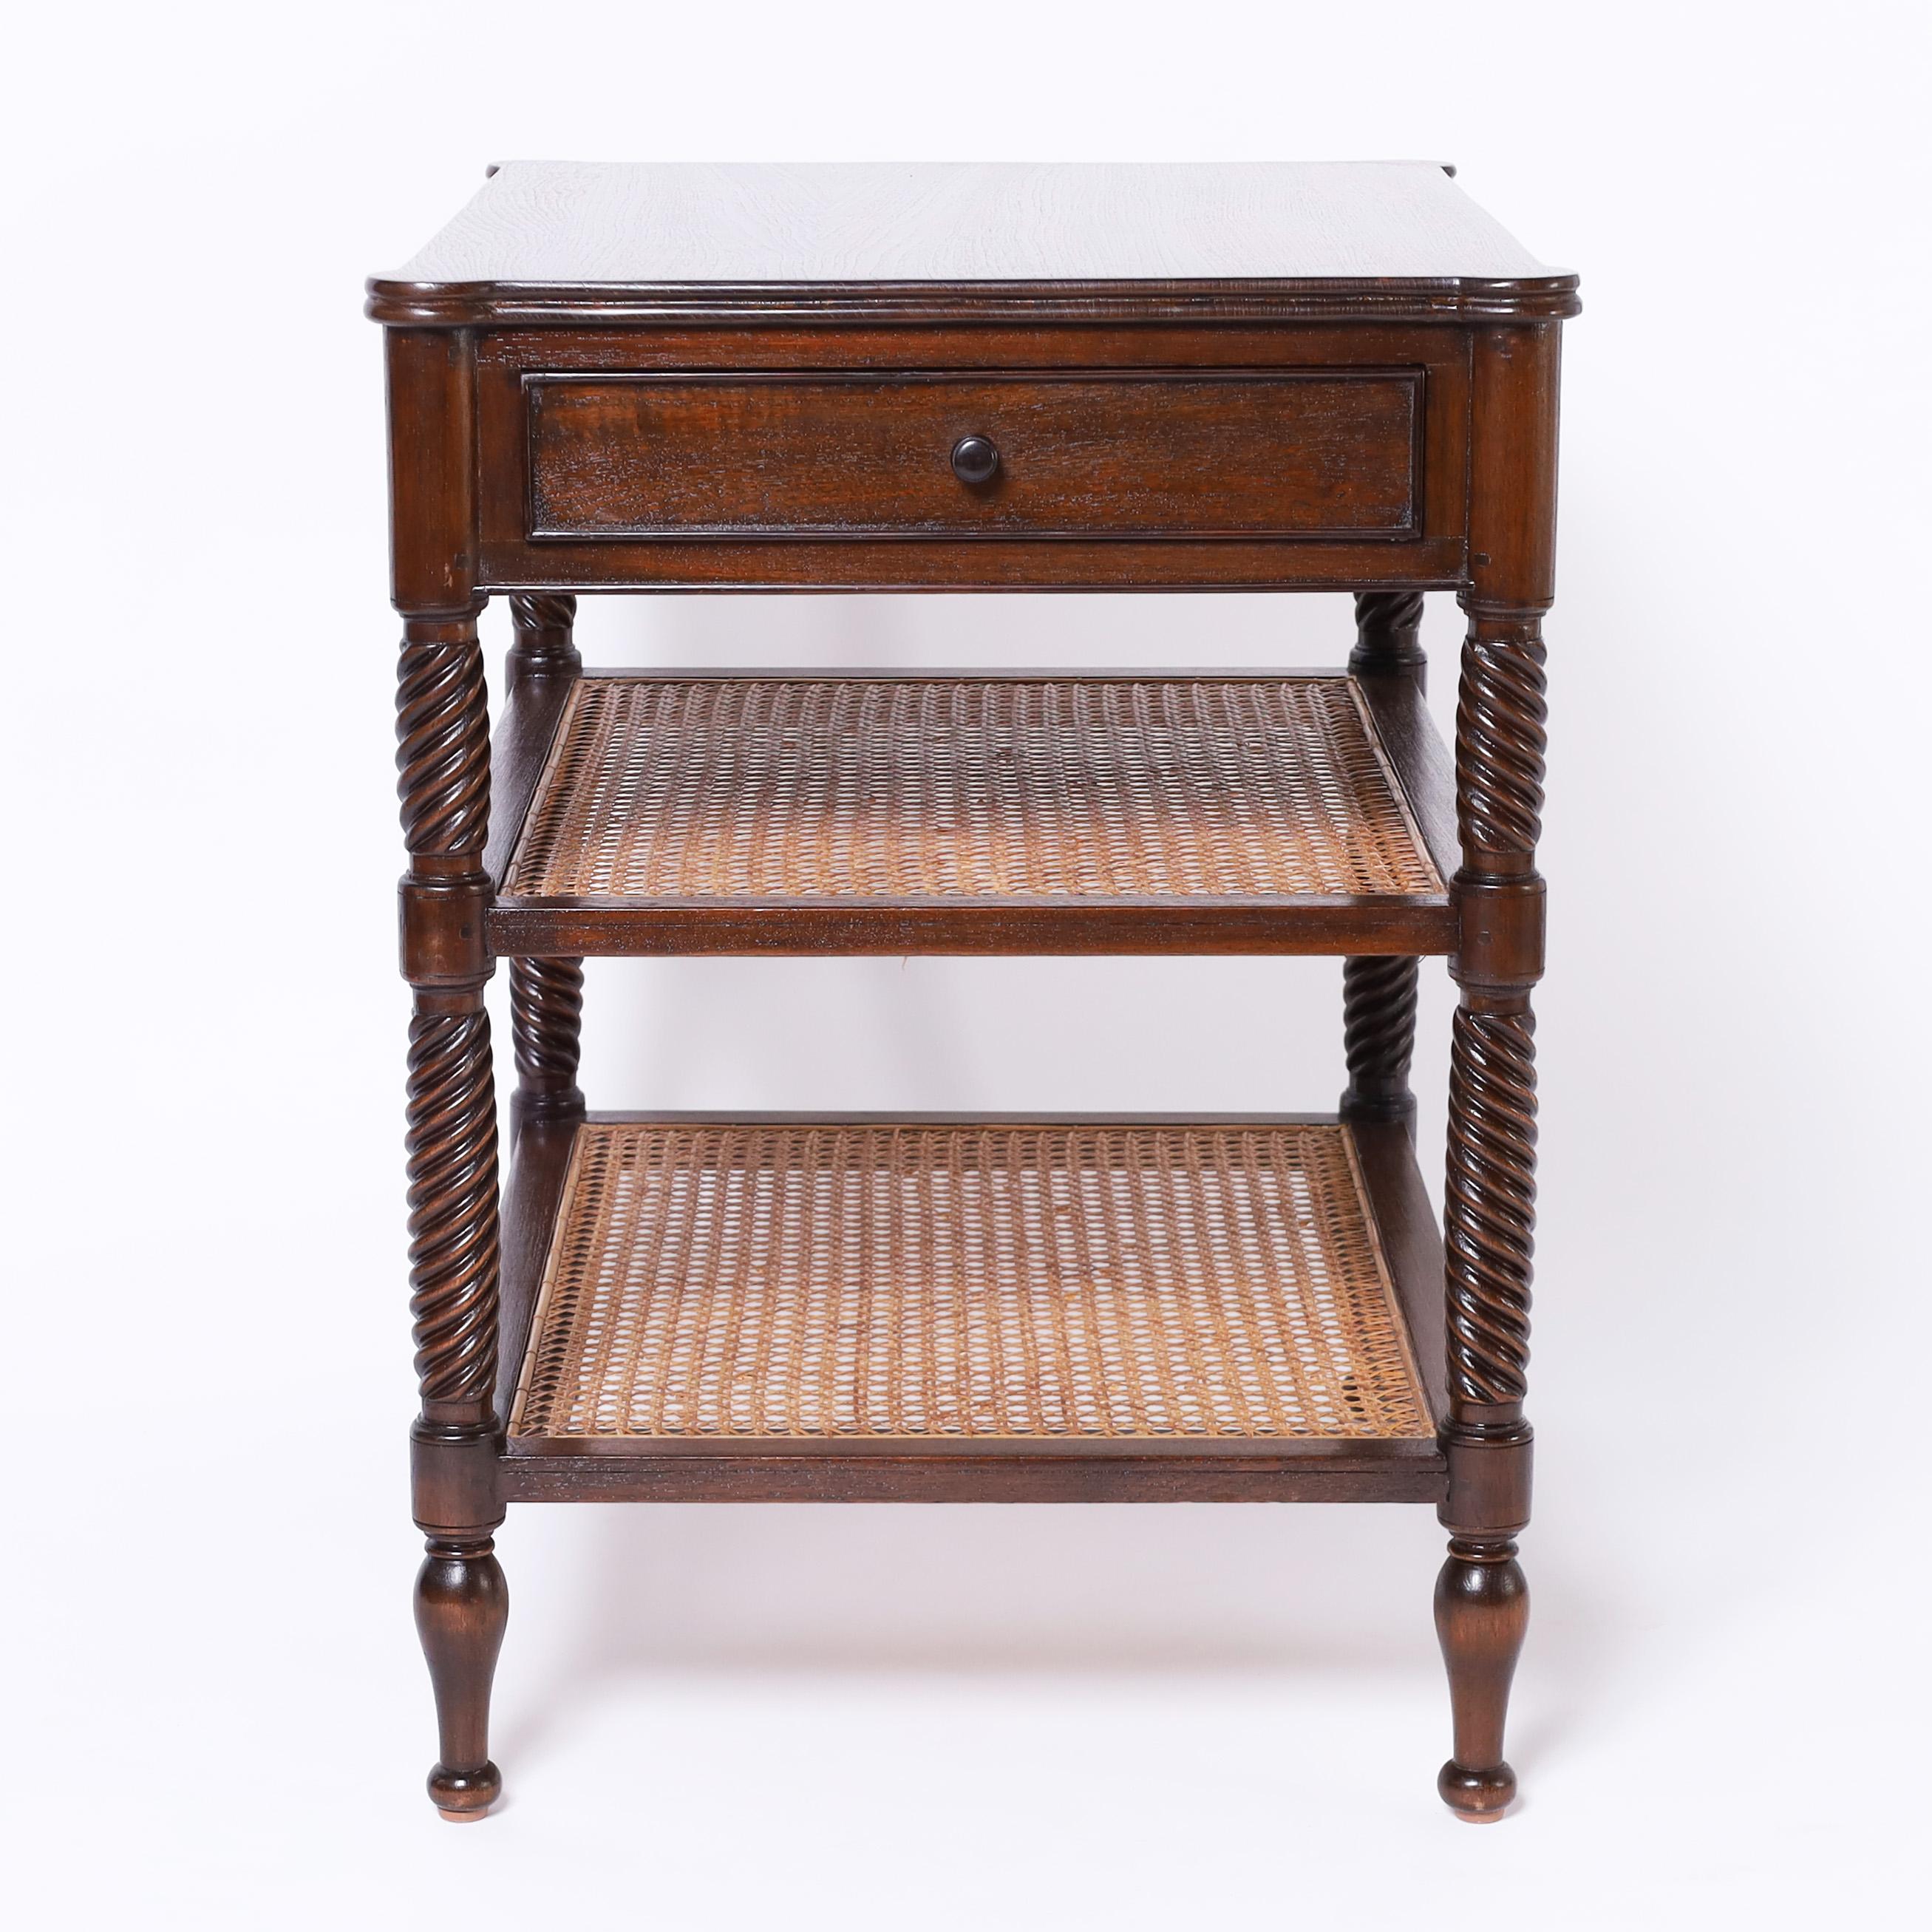 Standout English stand crafted in mahogany having one drawer over two caned lower tiers with turned and twisted supports over classic turned feet. 